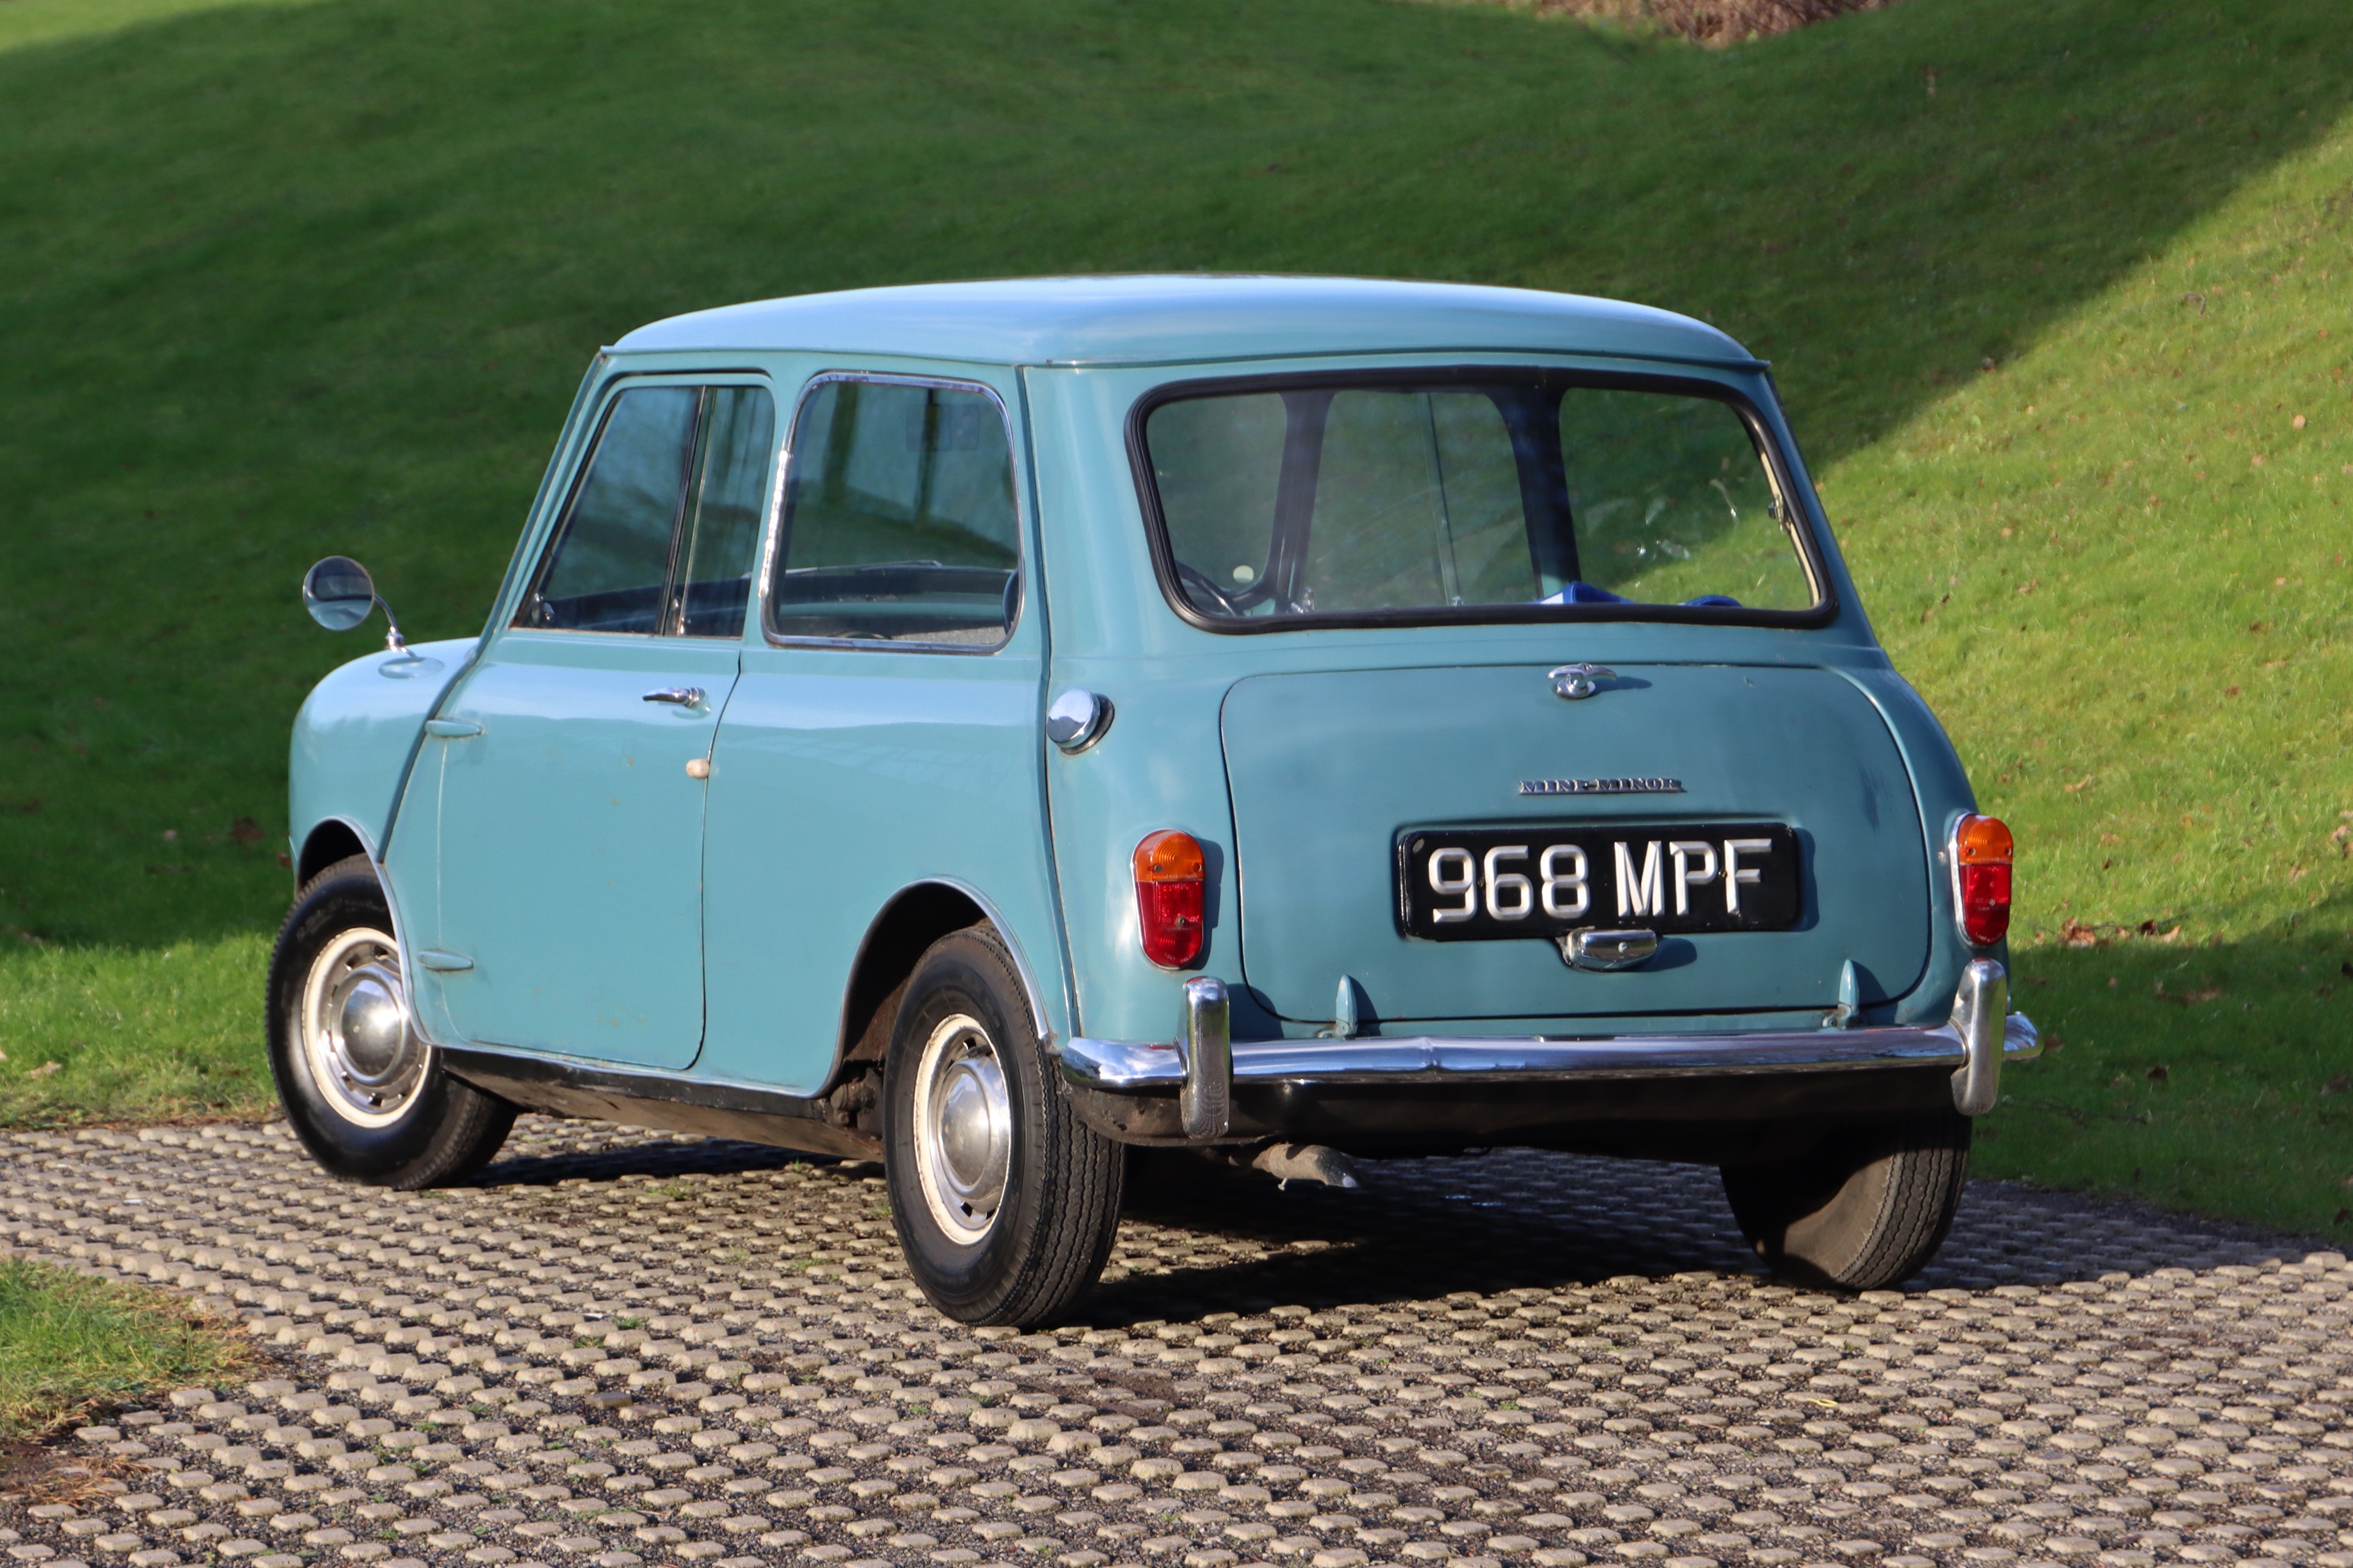 1959 MORRIS MINI MK1 850 DELUXE for sale by auction in Poole, Dorset,  United Kingdom